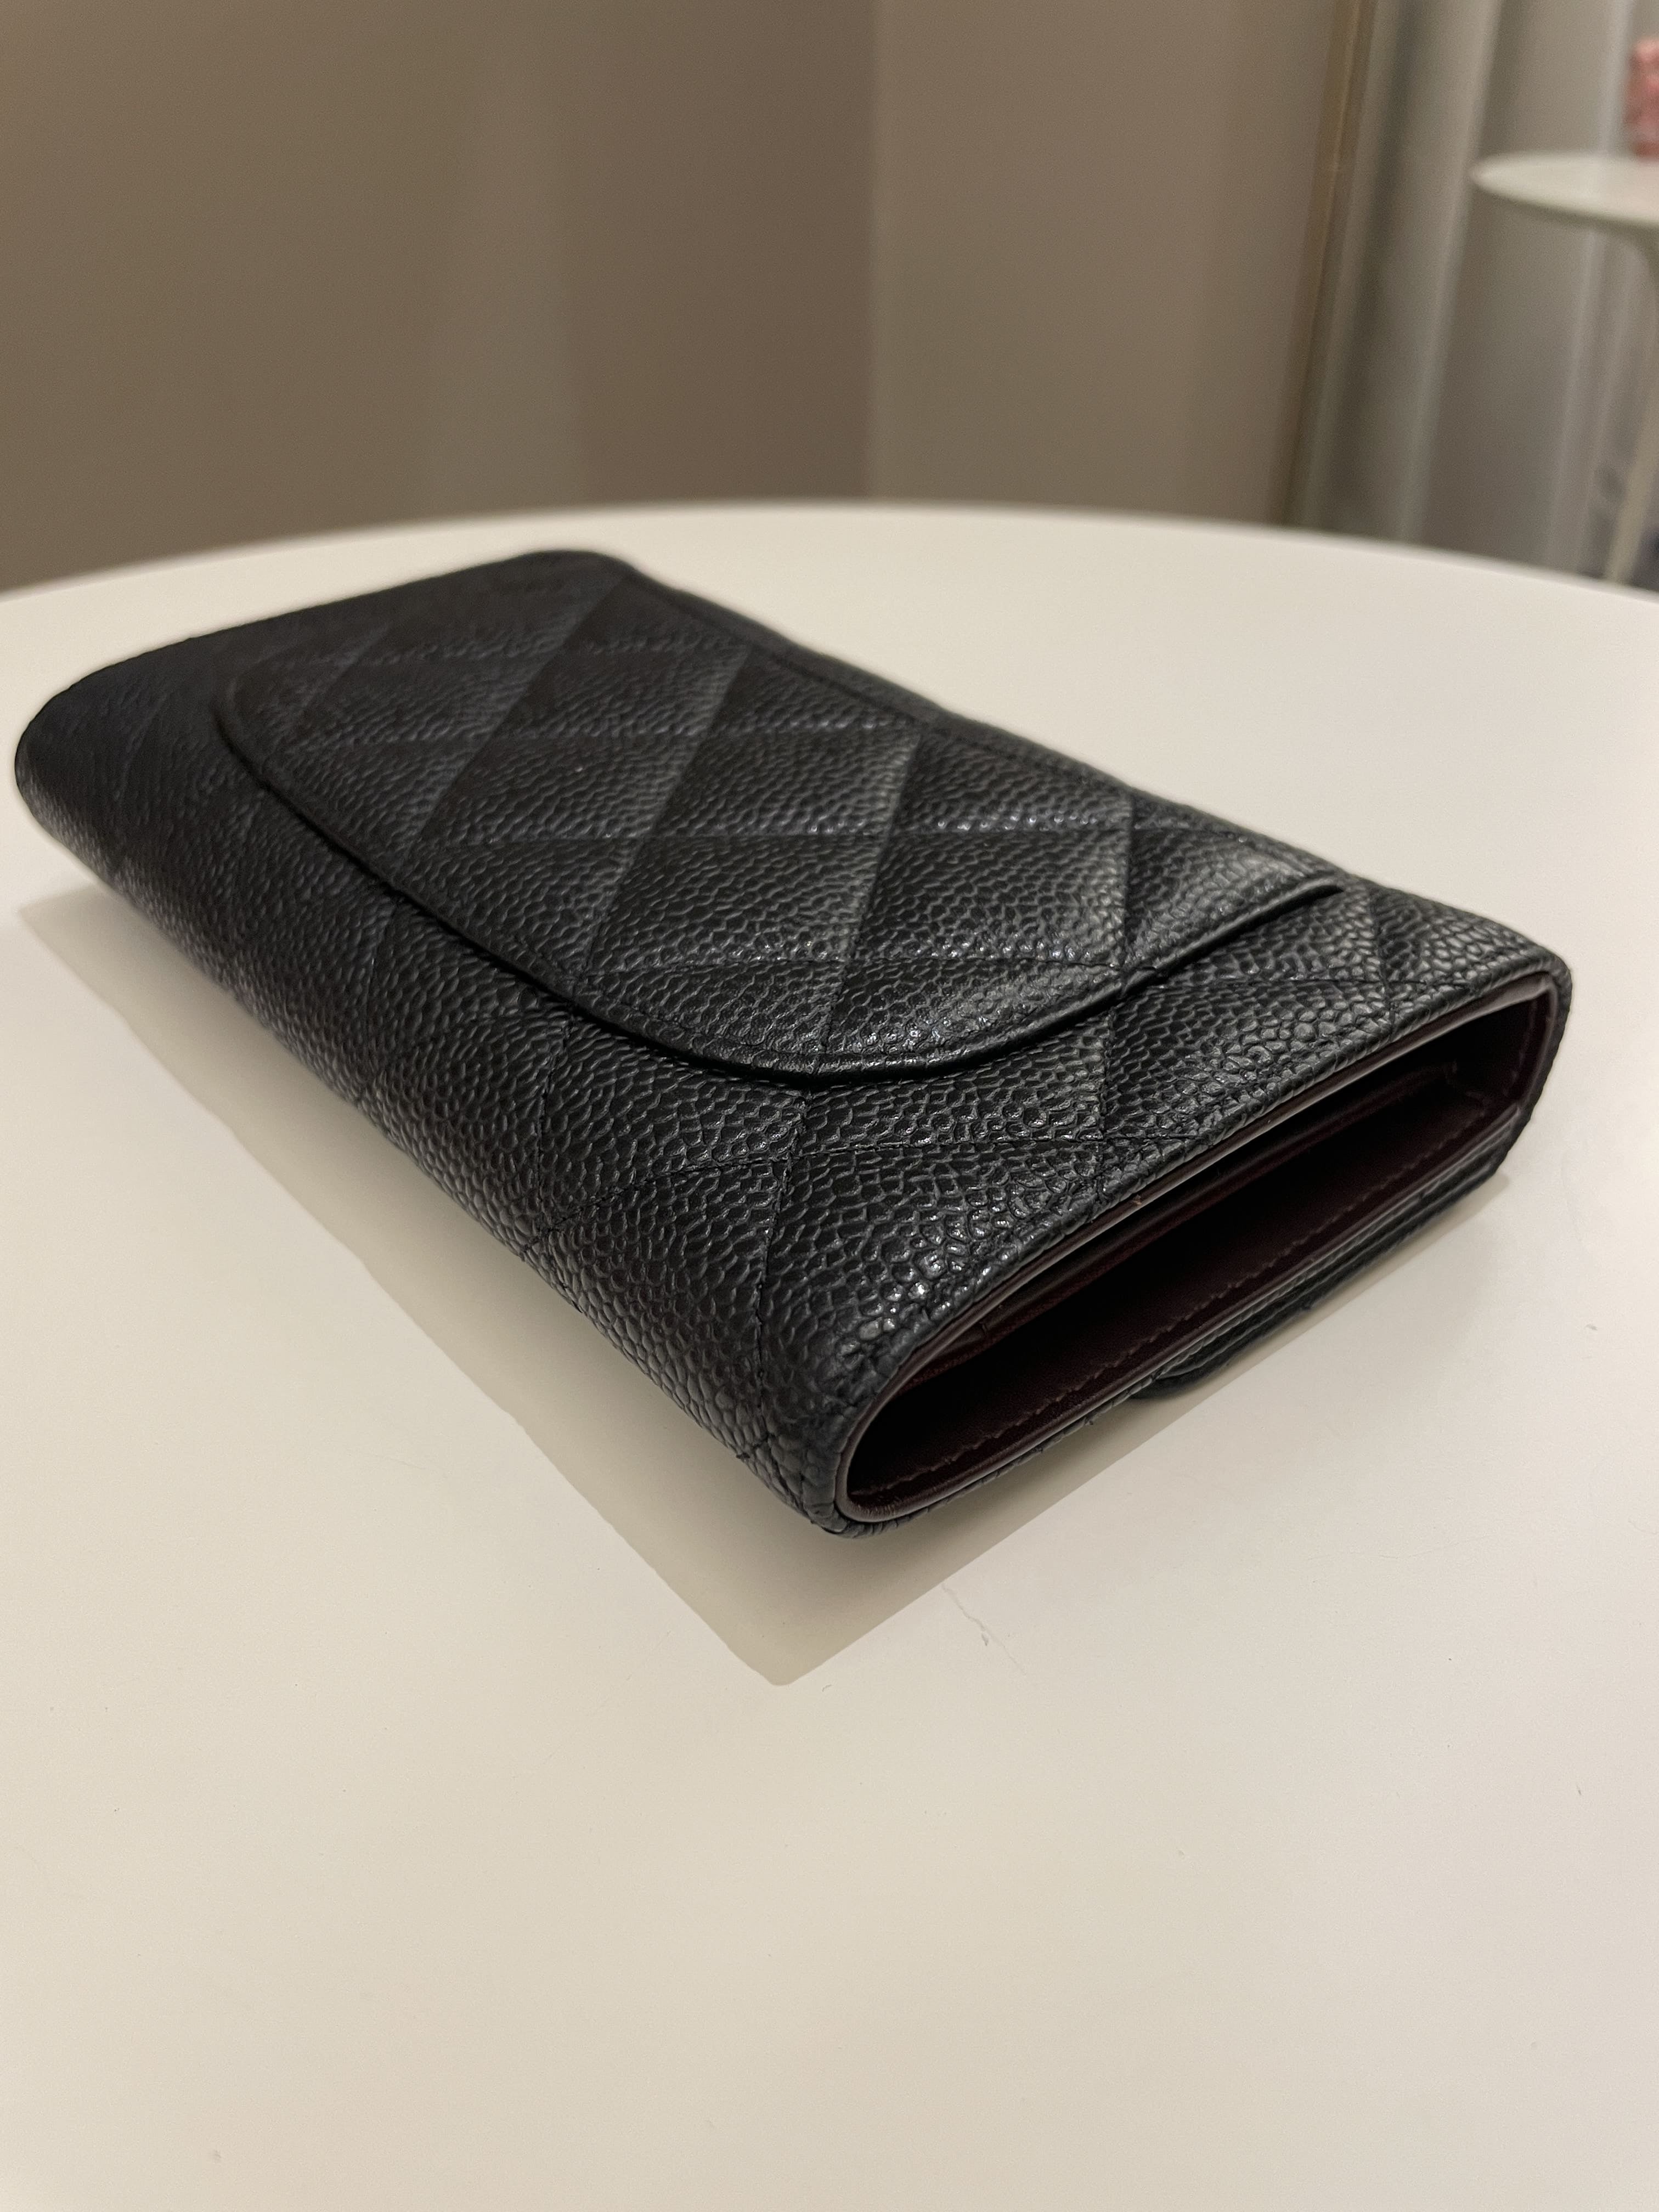 Chanel Classic Quilted Long Flap Wallet Black Caviar